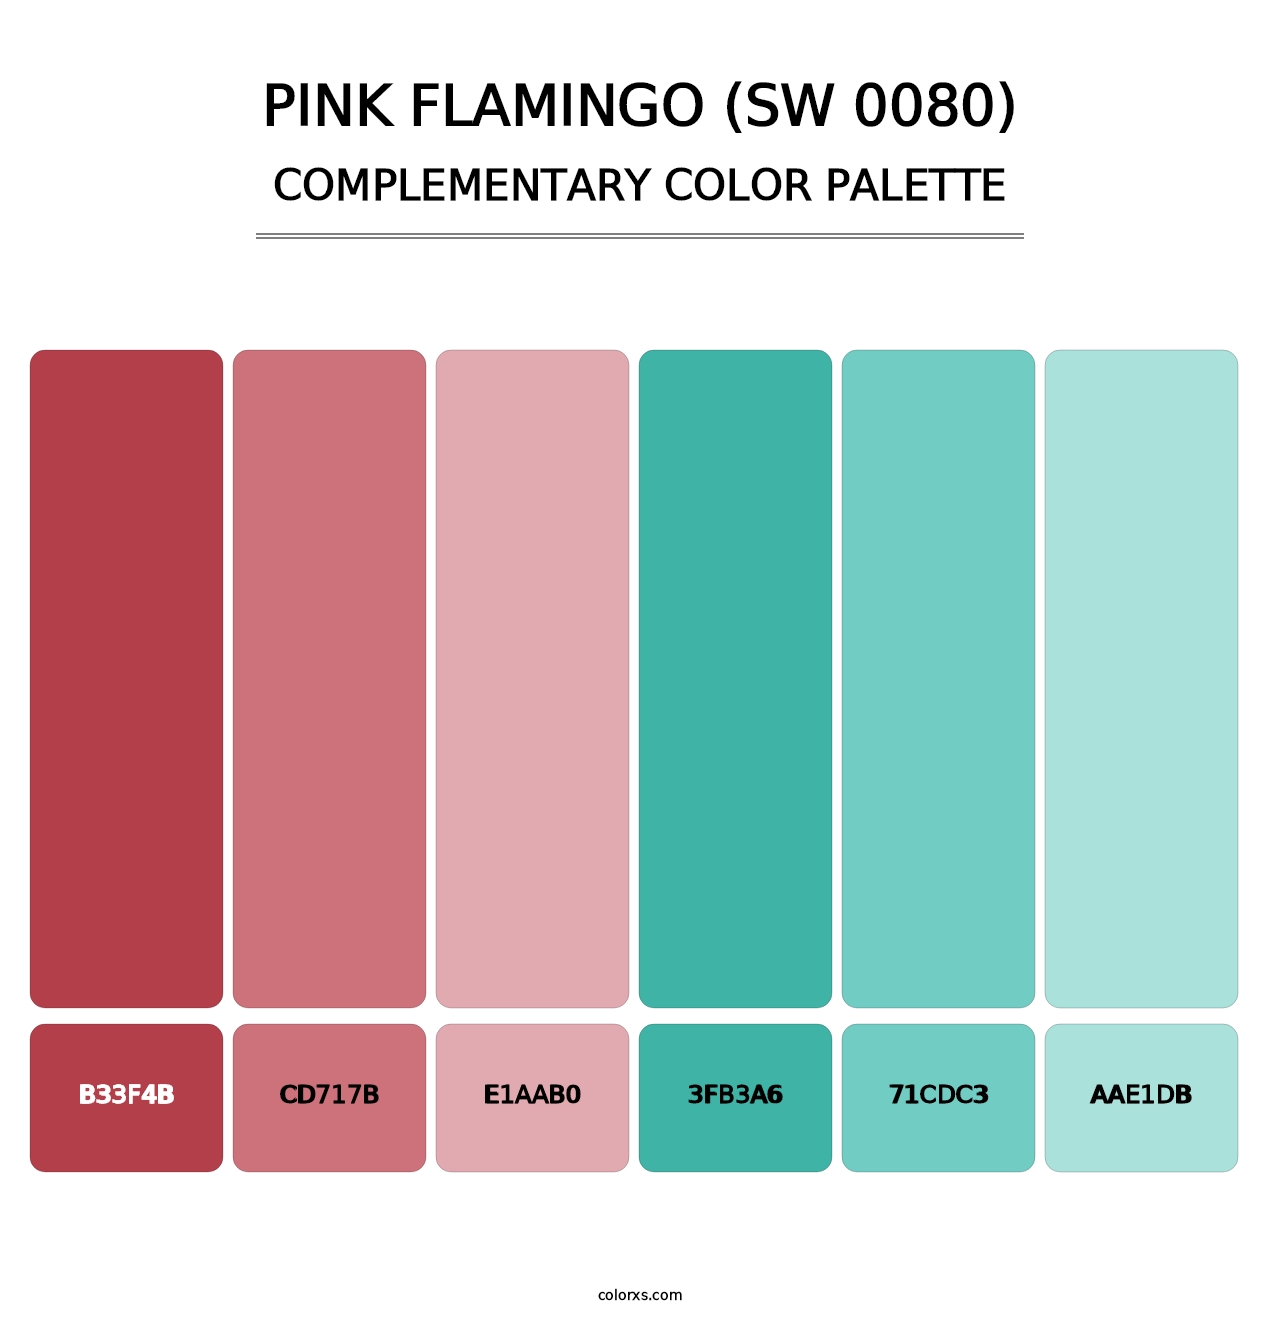 Pink Flamingo (SW 0080) - Complementary Color Palette